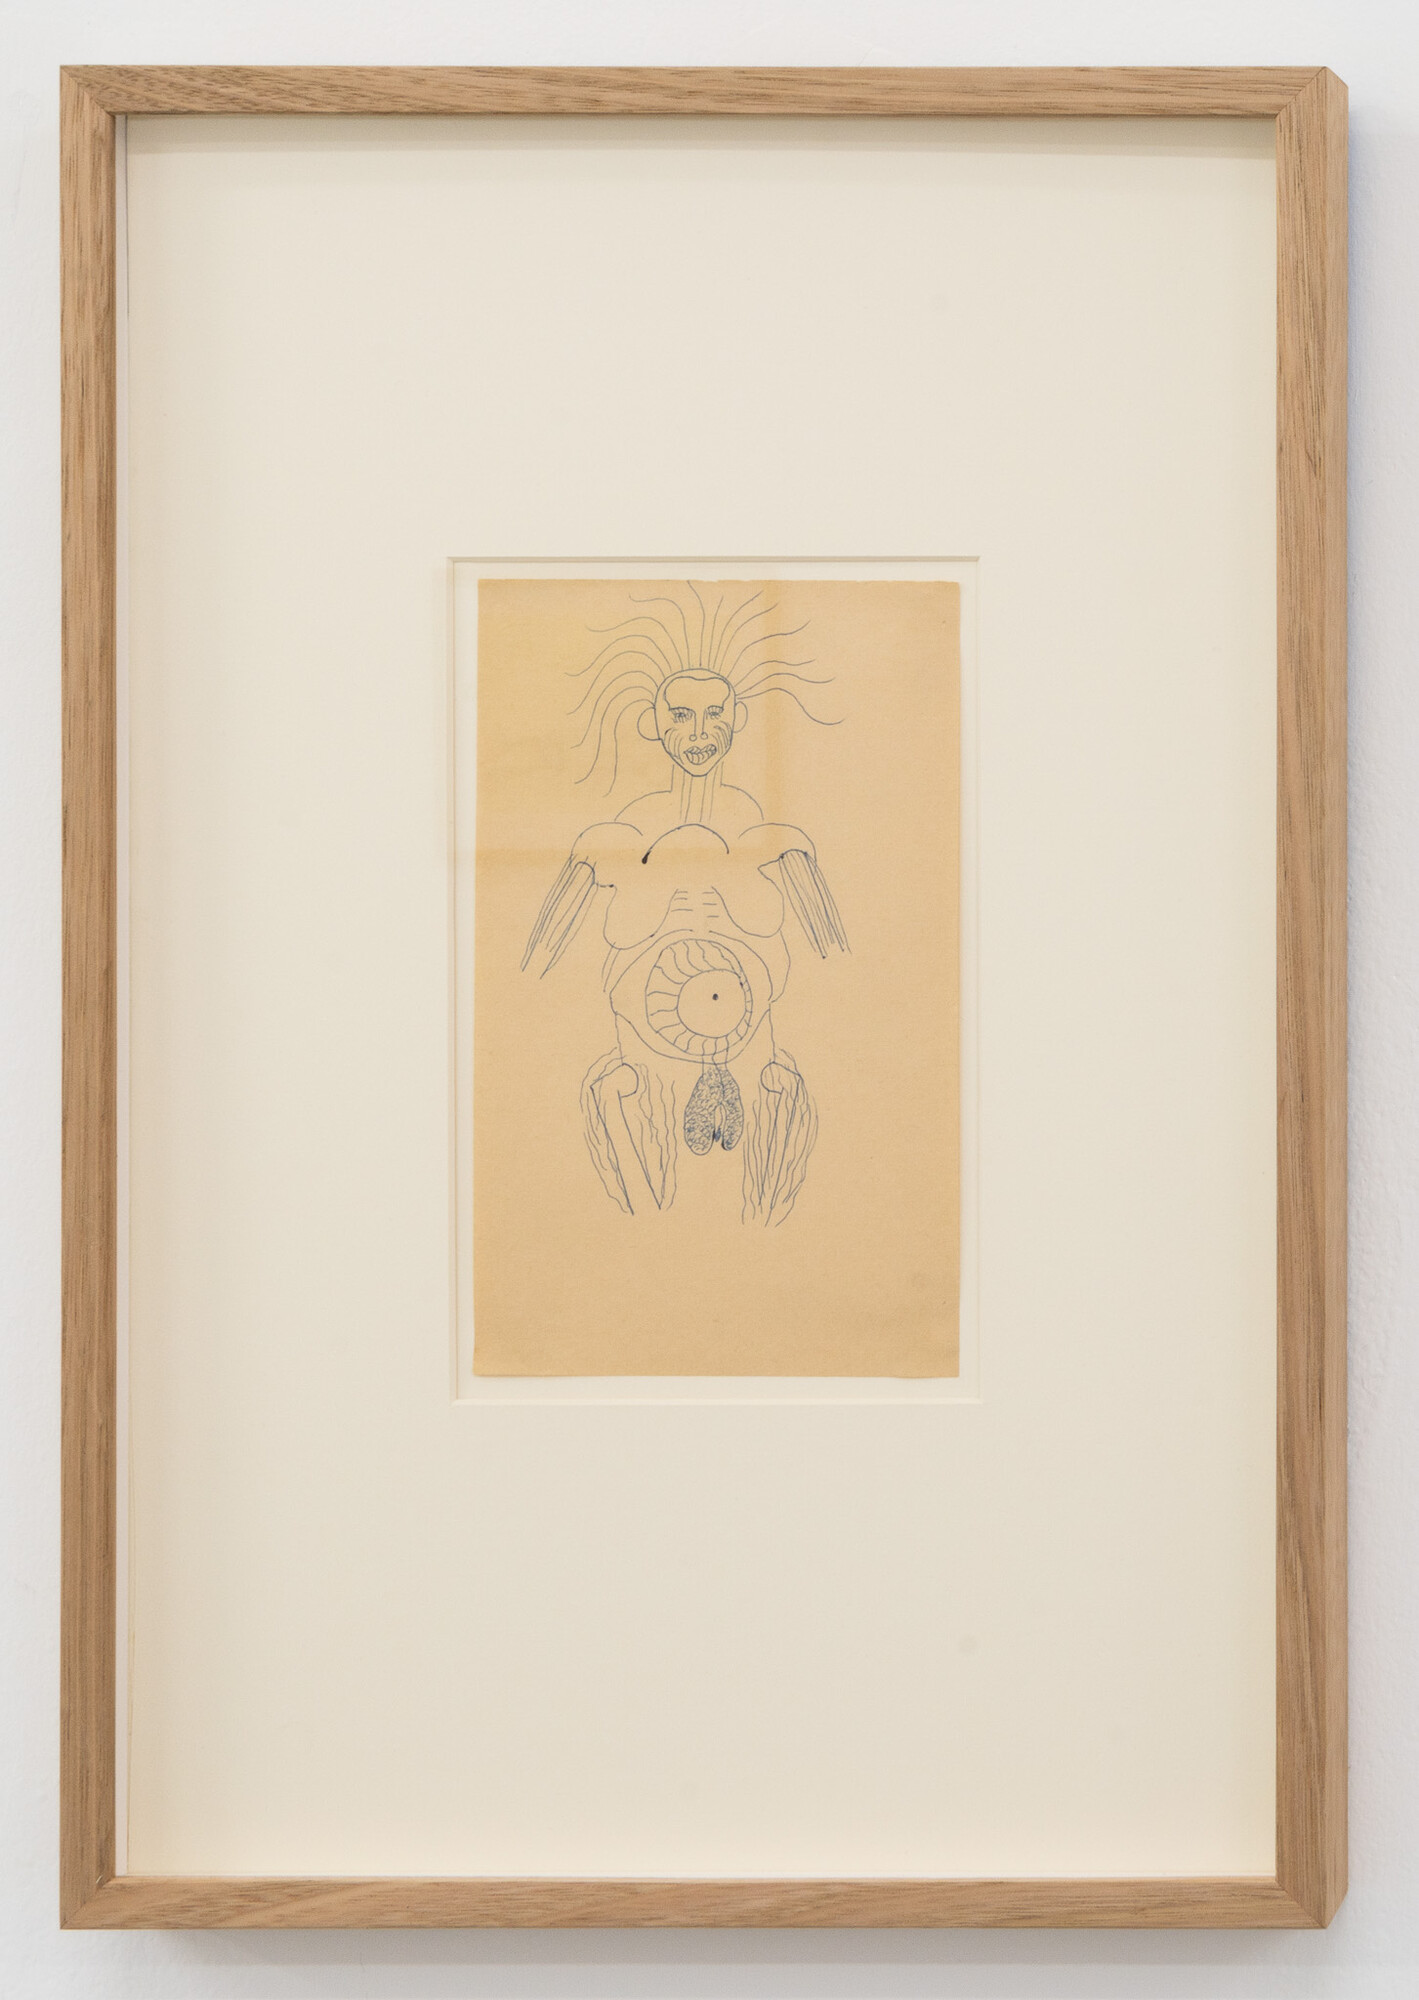 Vivienne Binns, No title (figure, striped cheeks, distended genitals, see-through thighs), 1965-6, biro on paper, 20.0 x 12.0 cm. Courtesy of the artist and Sutton Gallery.